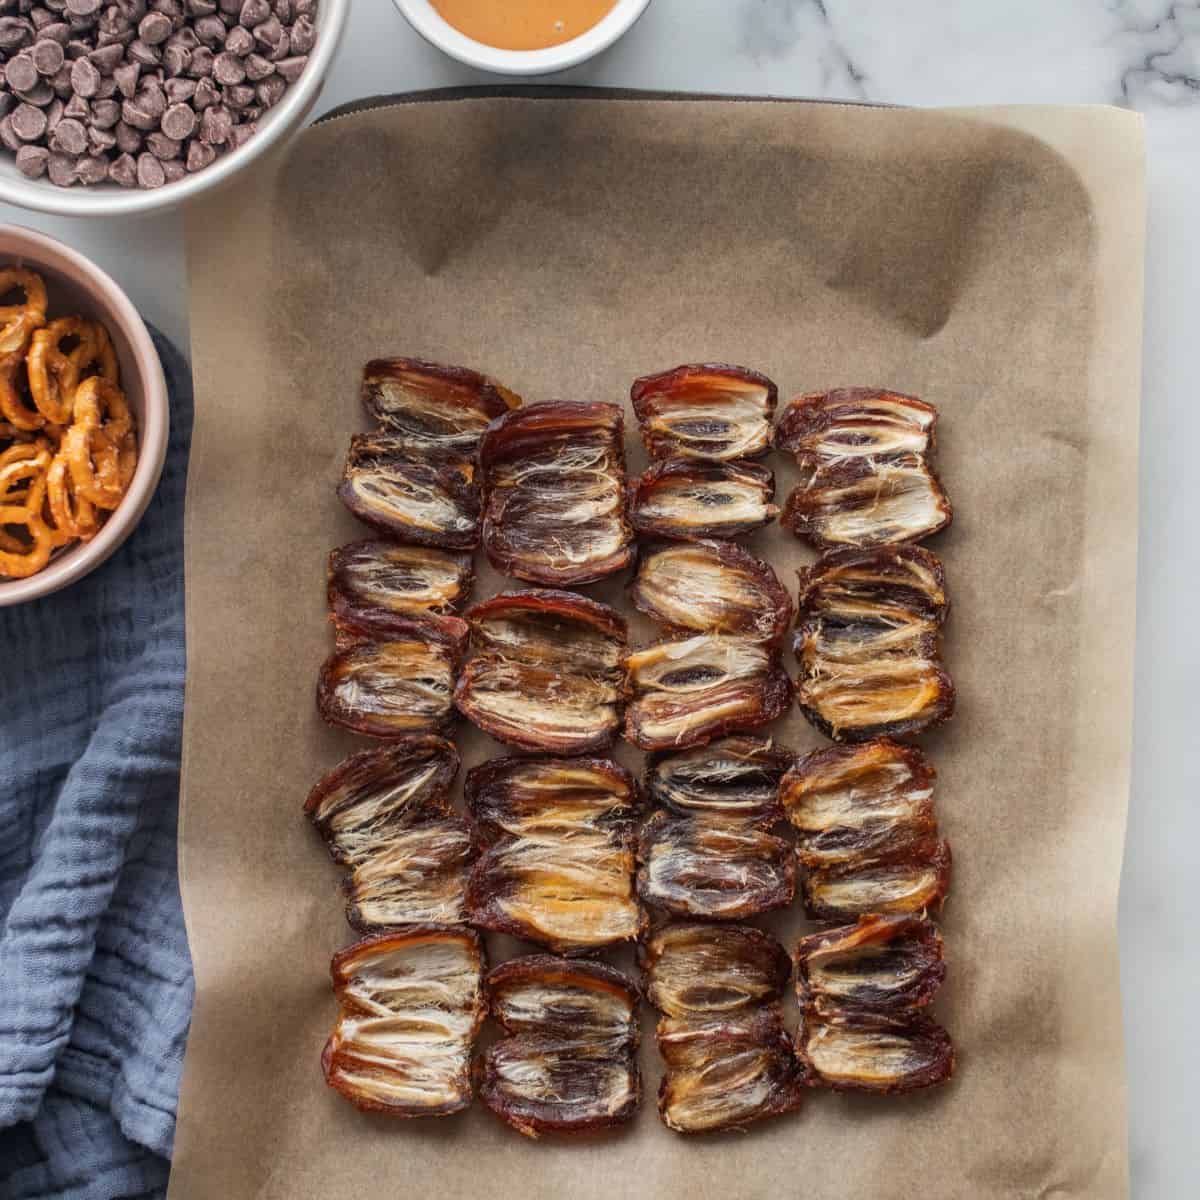 Date halves on parchment paper on a baking sheet on a staged countertop.